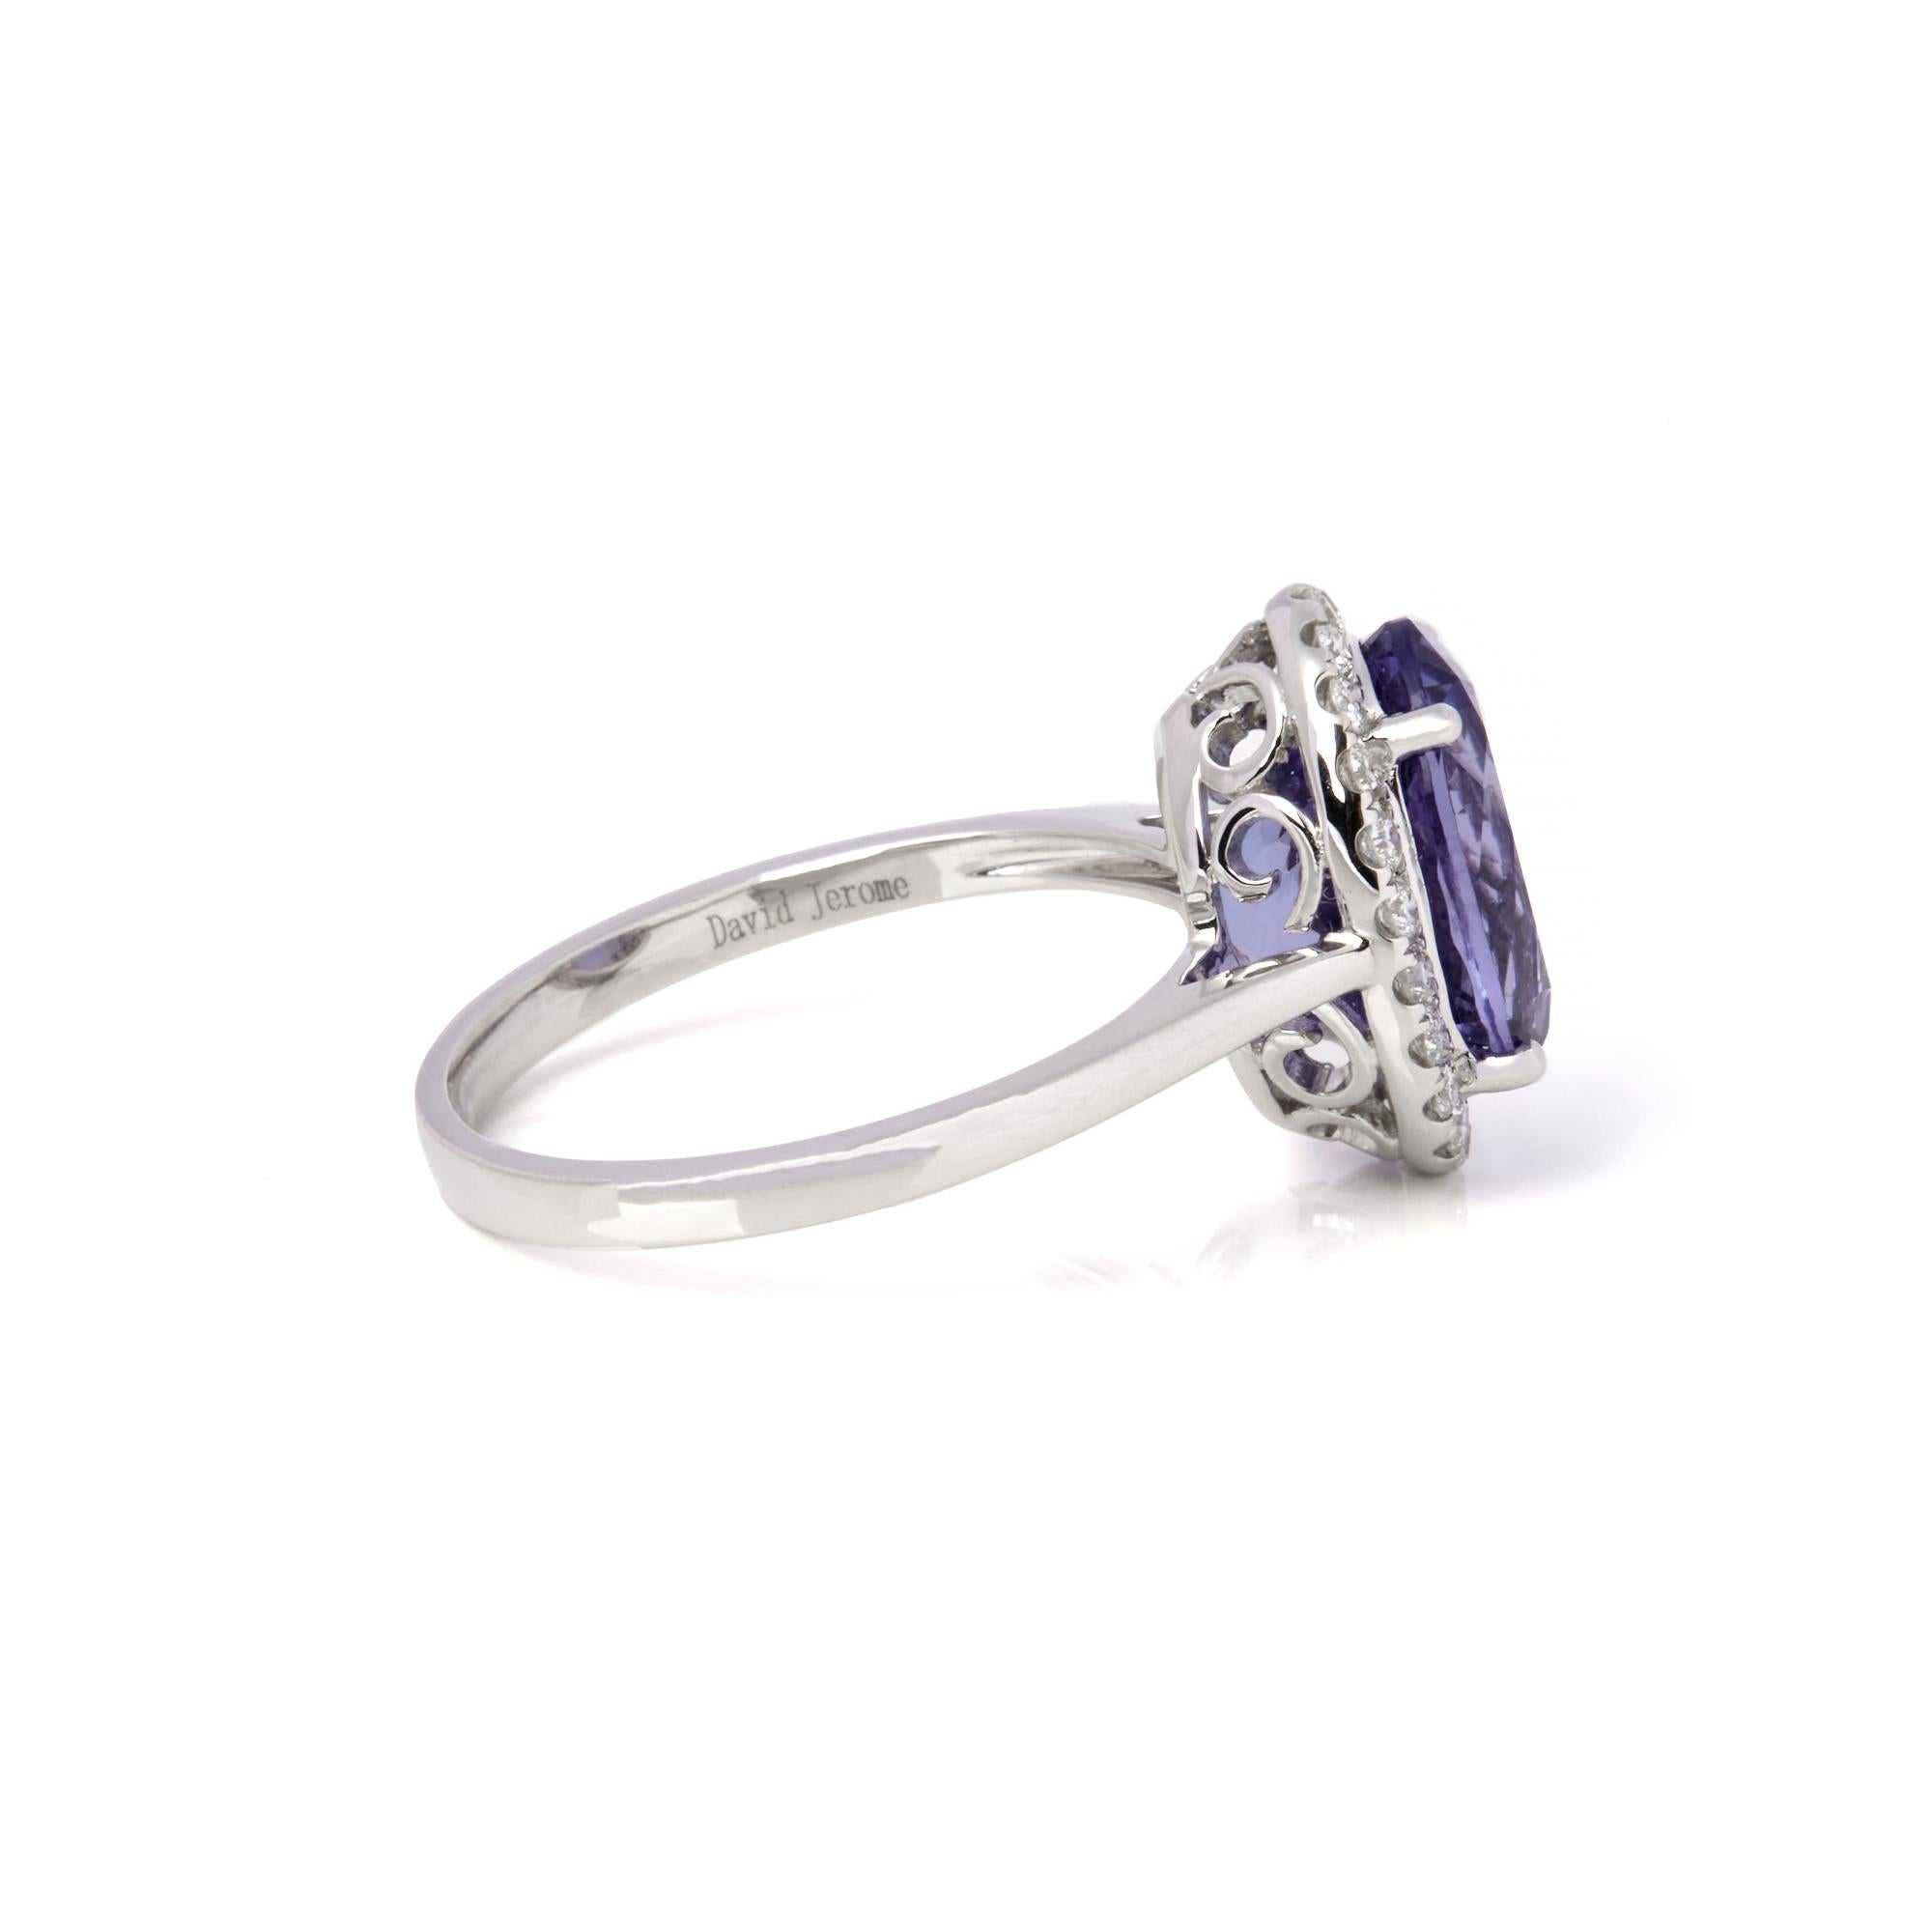 David Jerome Certified 4.23ct Oval Cut Tanzanite and Diamond Ring In New Condition For Sale In Bishop's Stortford, Hertfordshire